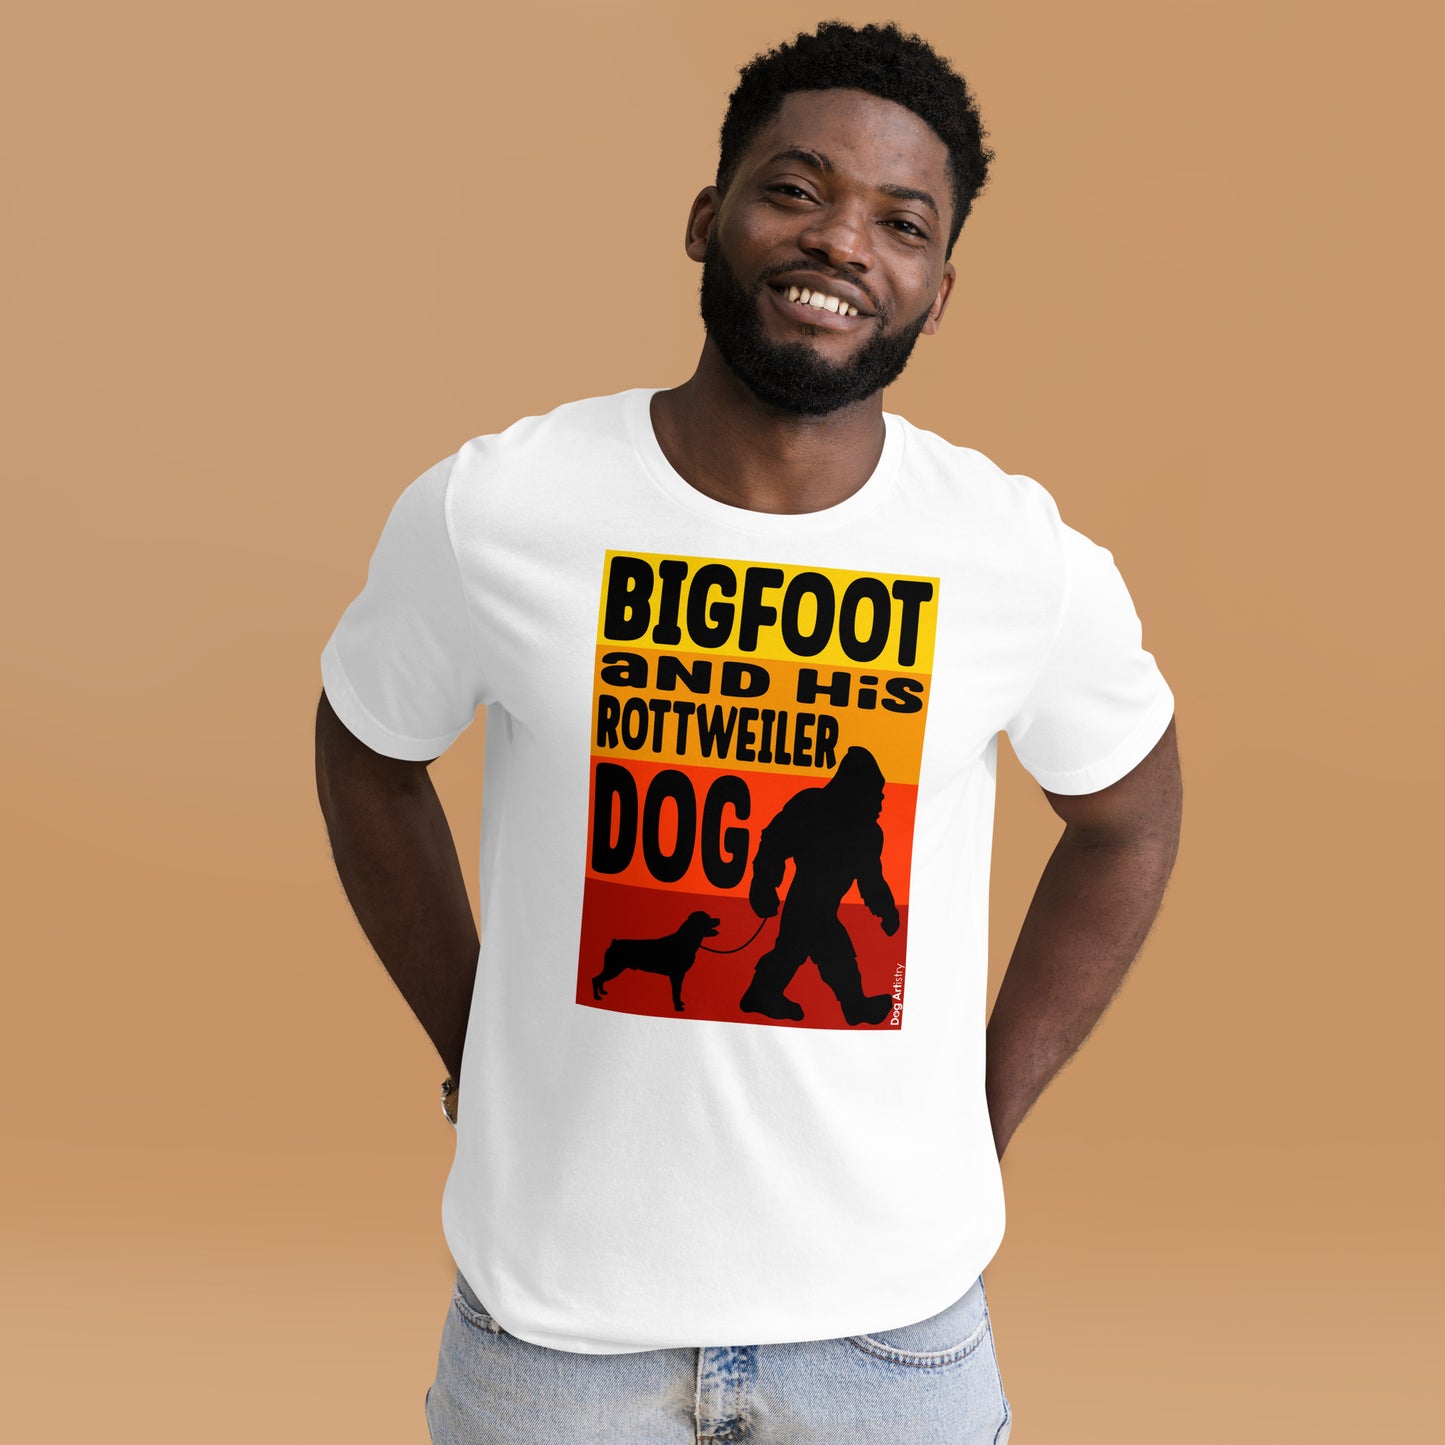 Bigfoot and his Rottweiler unisex white t-shirt by Dog Artistry.